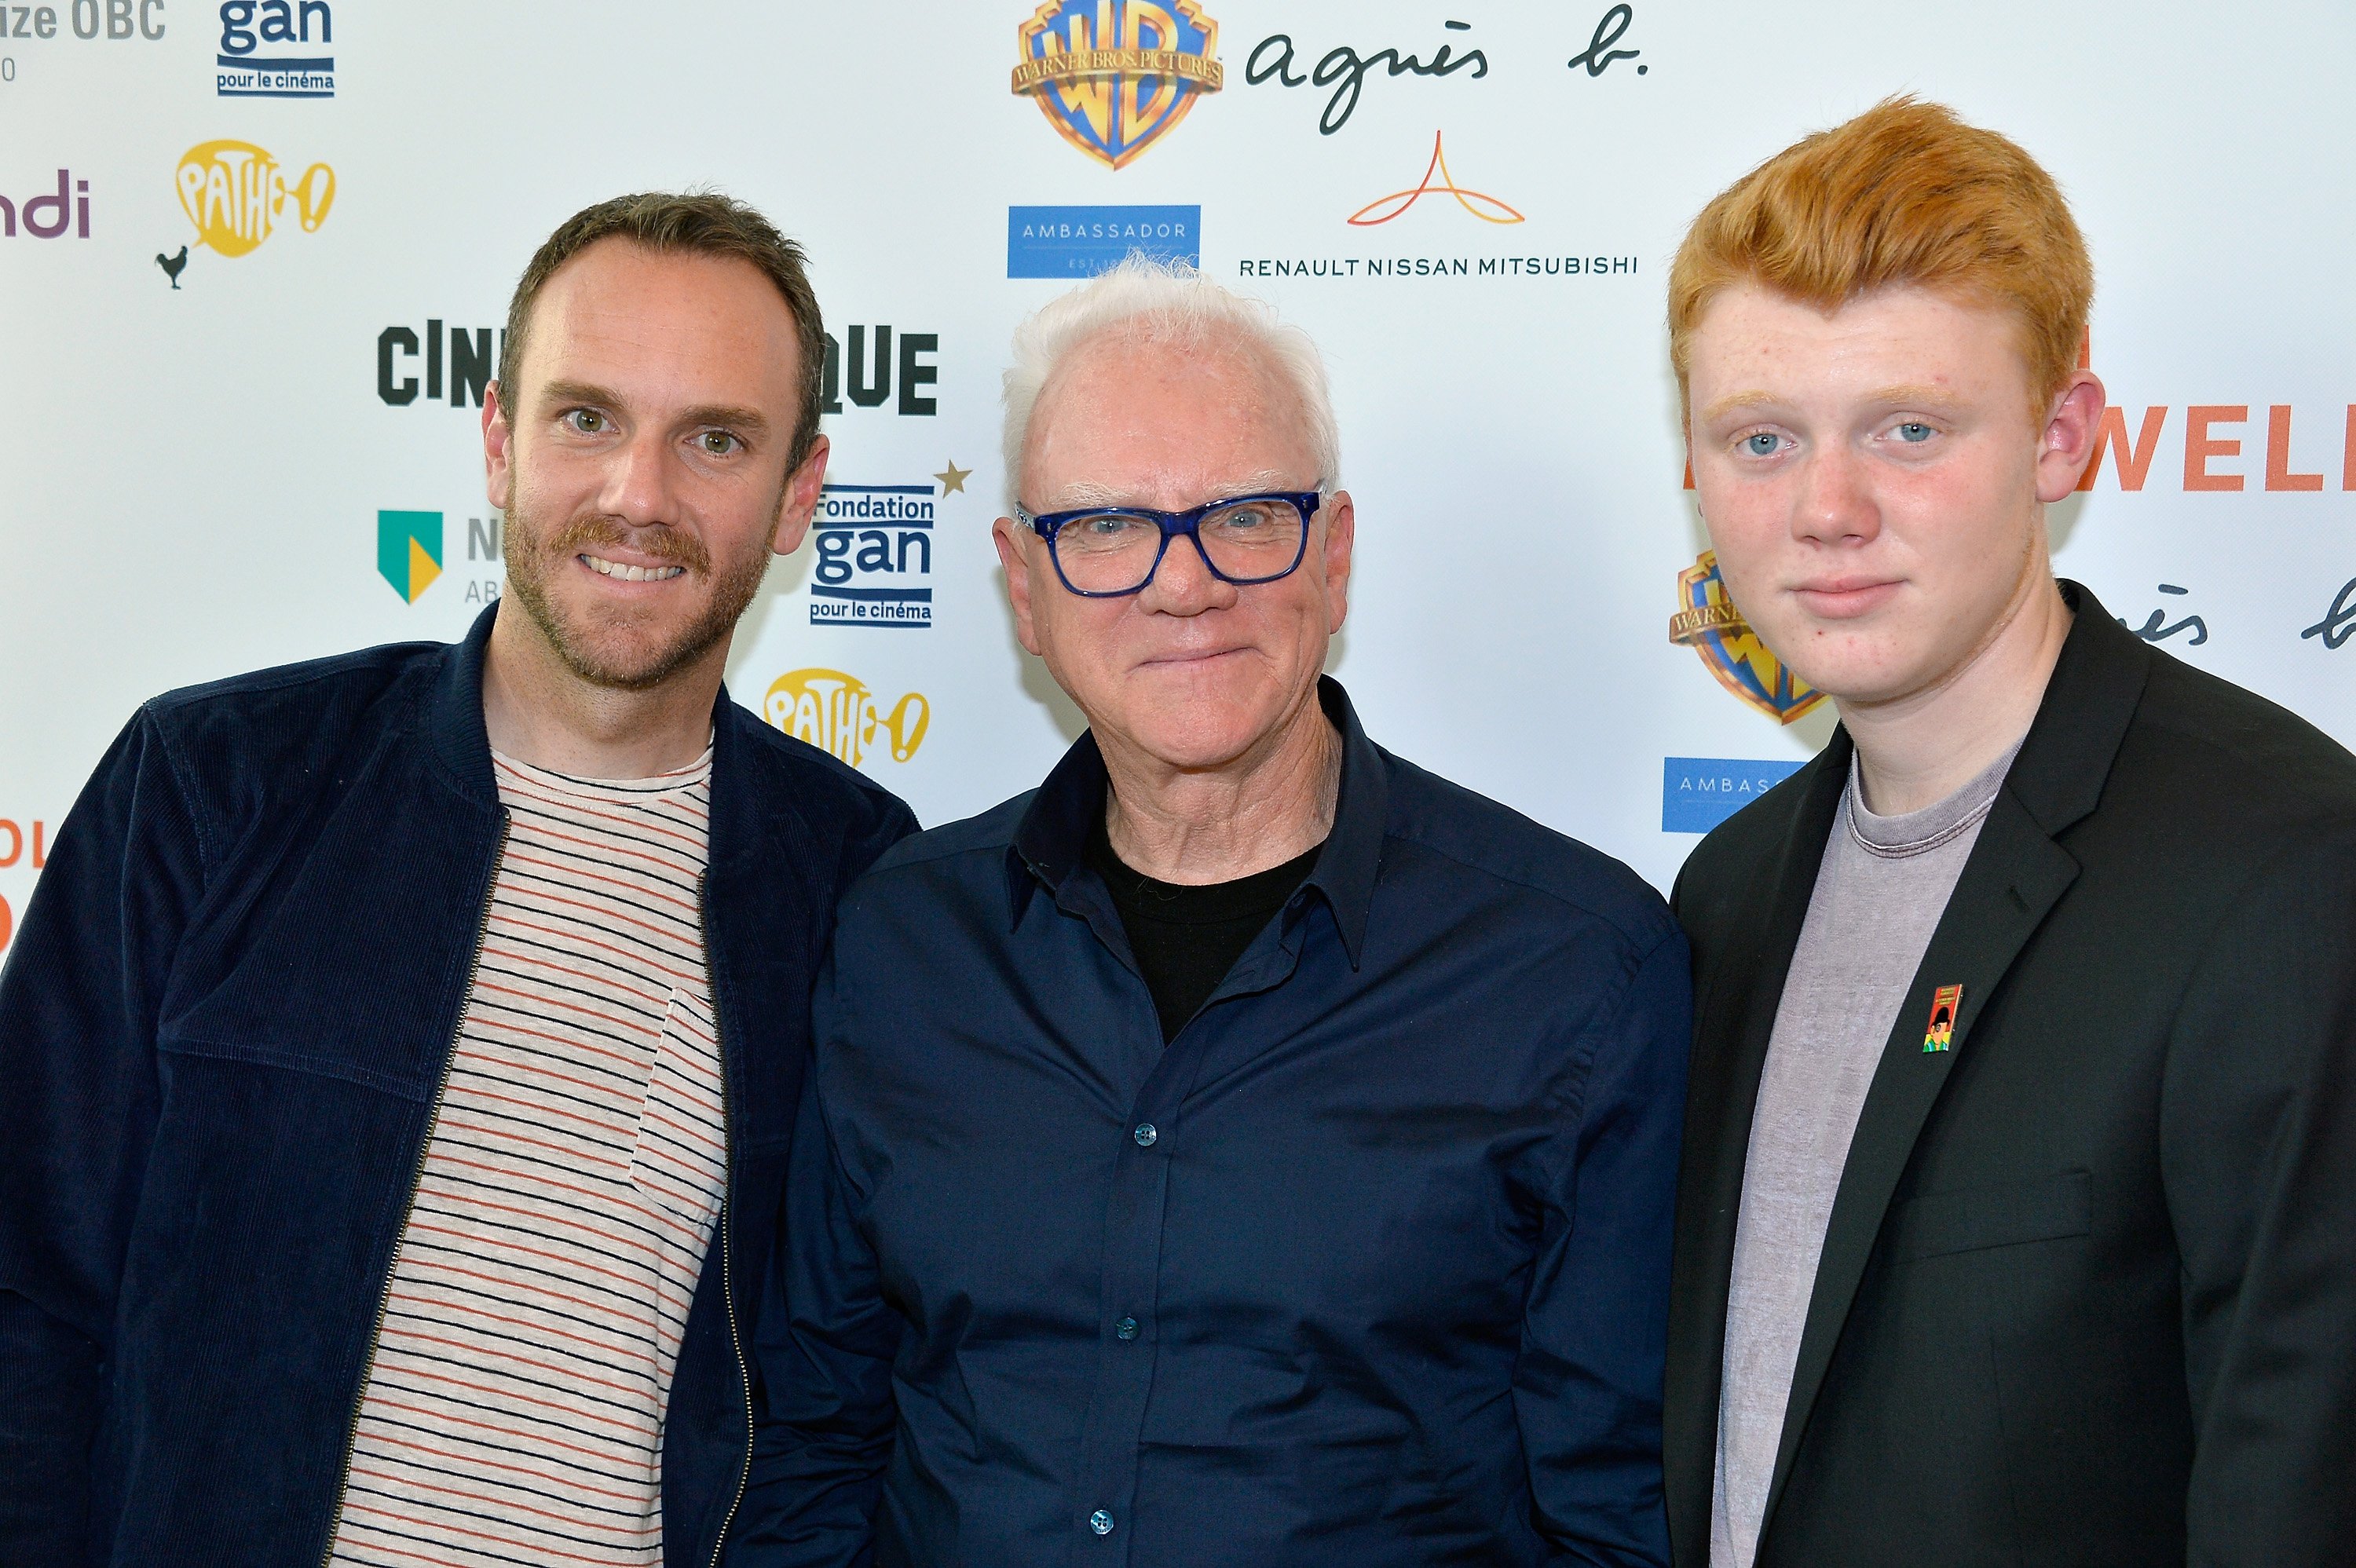 Charlie McDowell, Malcolm McDowell, and Beckett McDowell at the "Malcolm McDowell Retrospective" on June 20, 2018, in Paris | Source: Getty Images